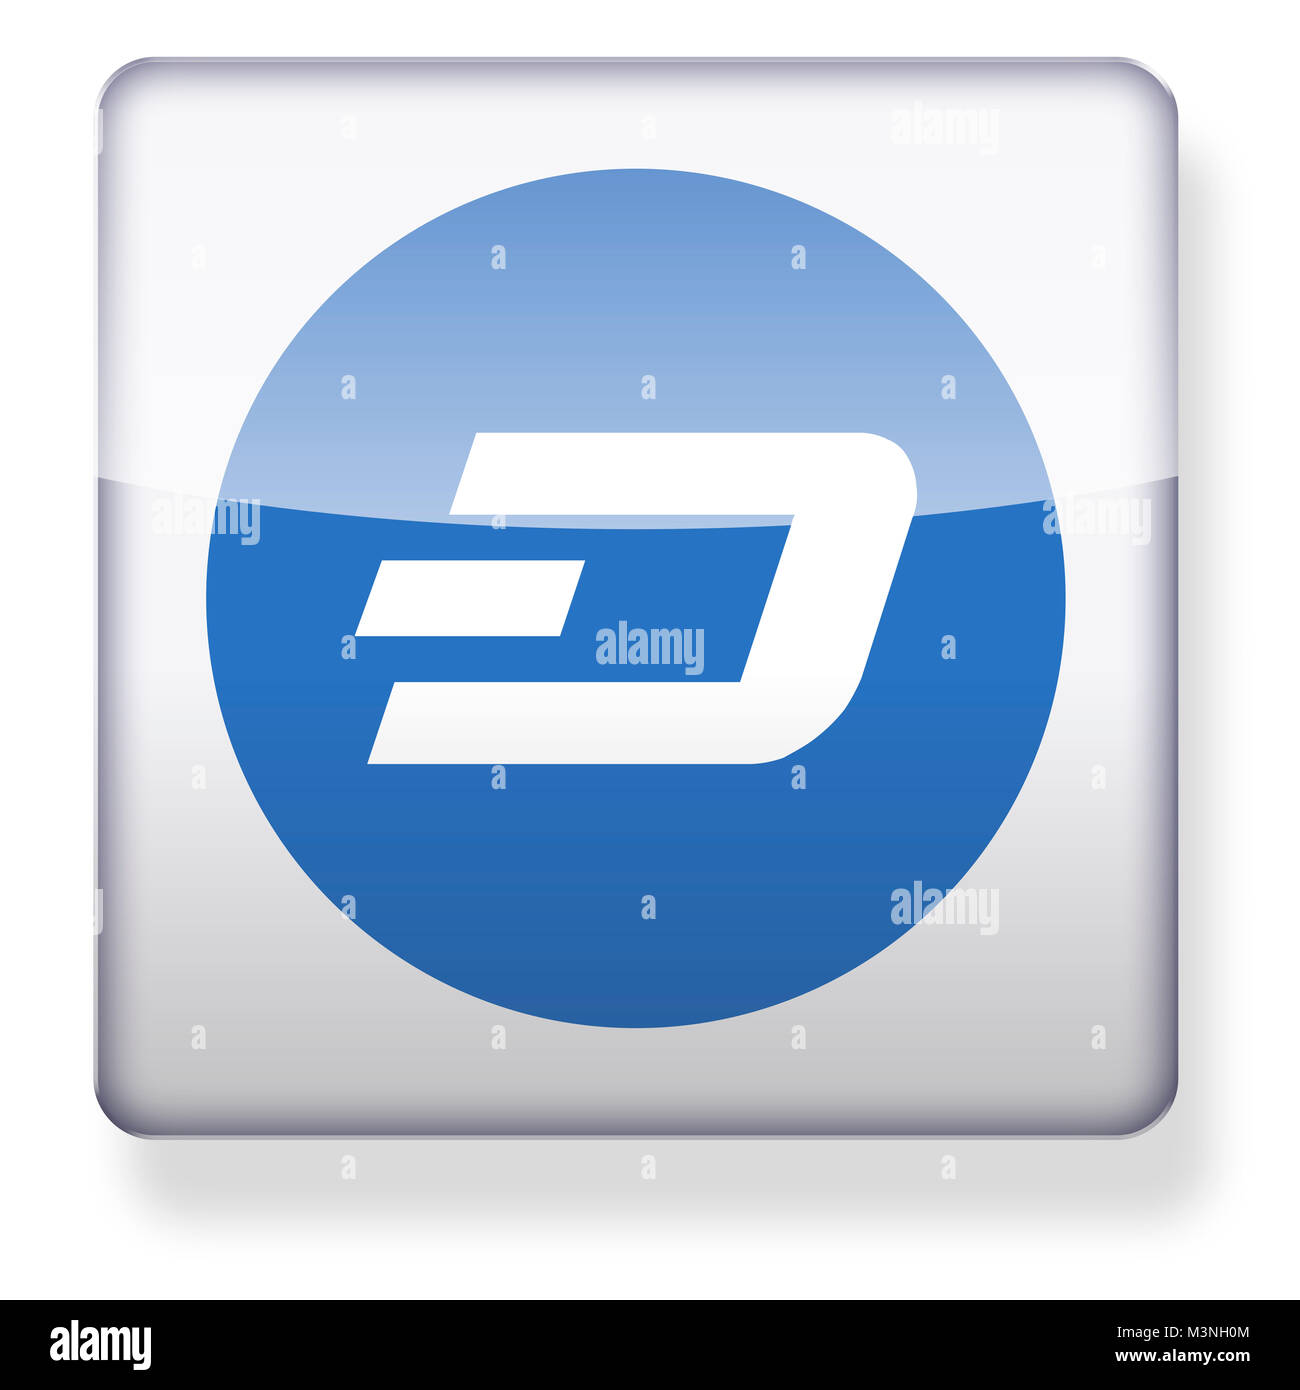 Dash cryptocurrency DASH logo as an app icon. Clipping path included. Stock Photo